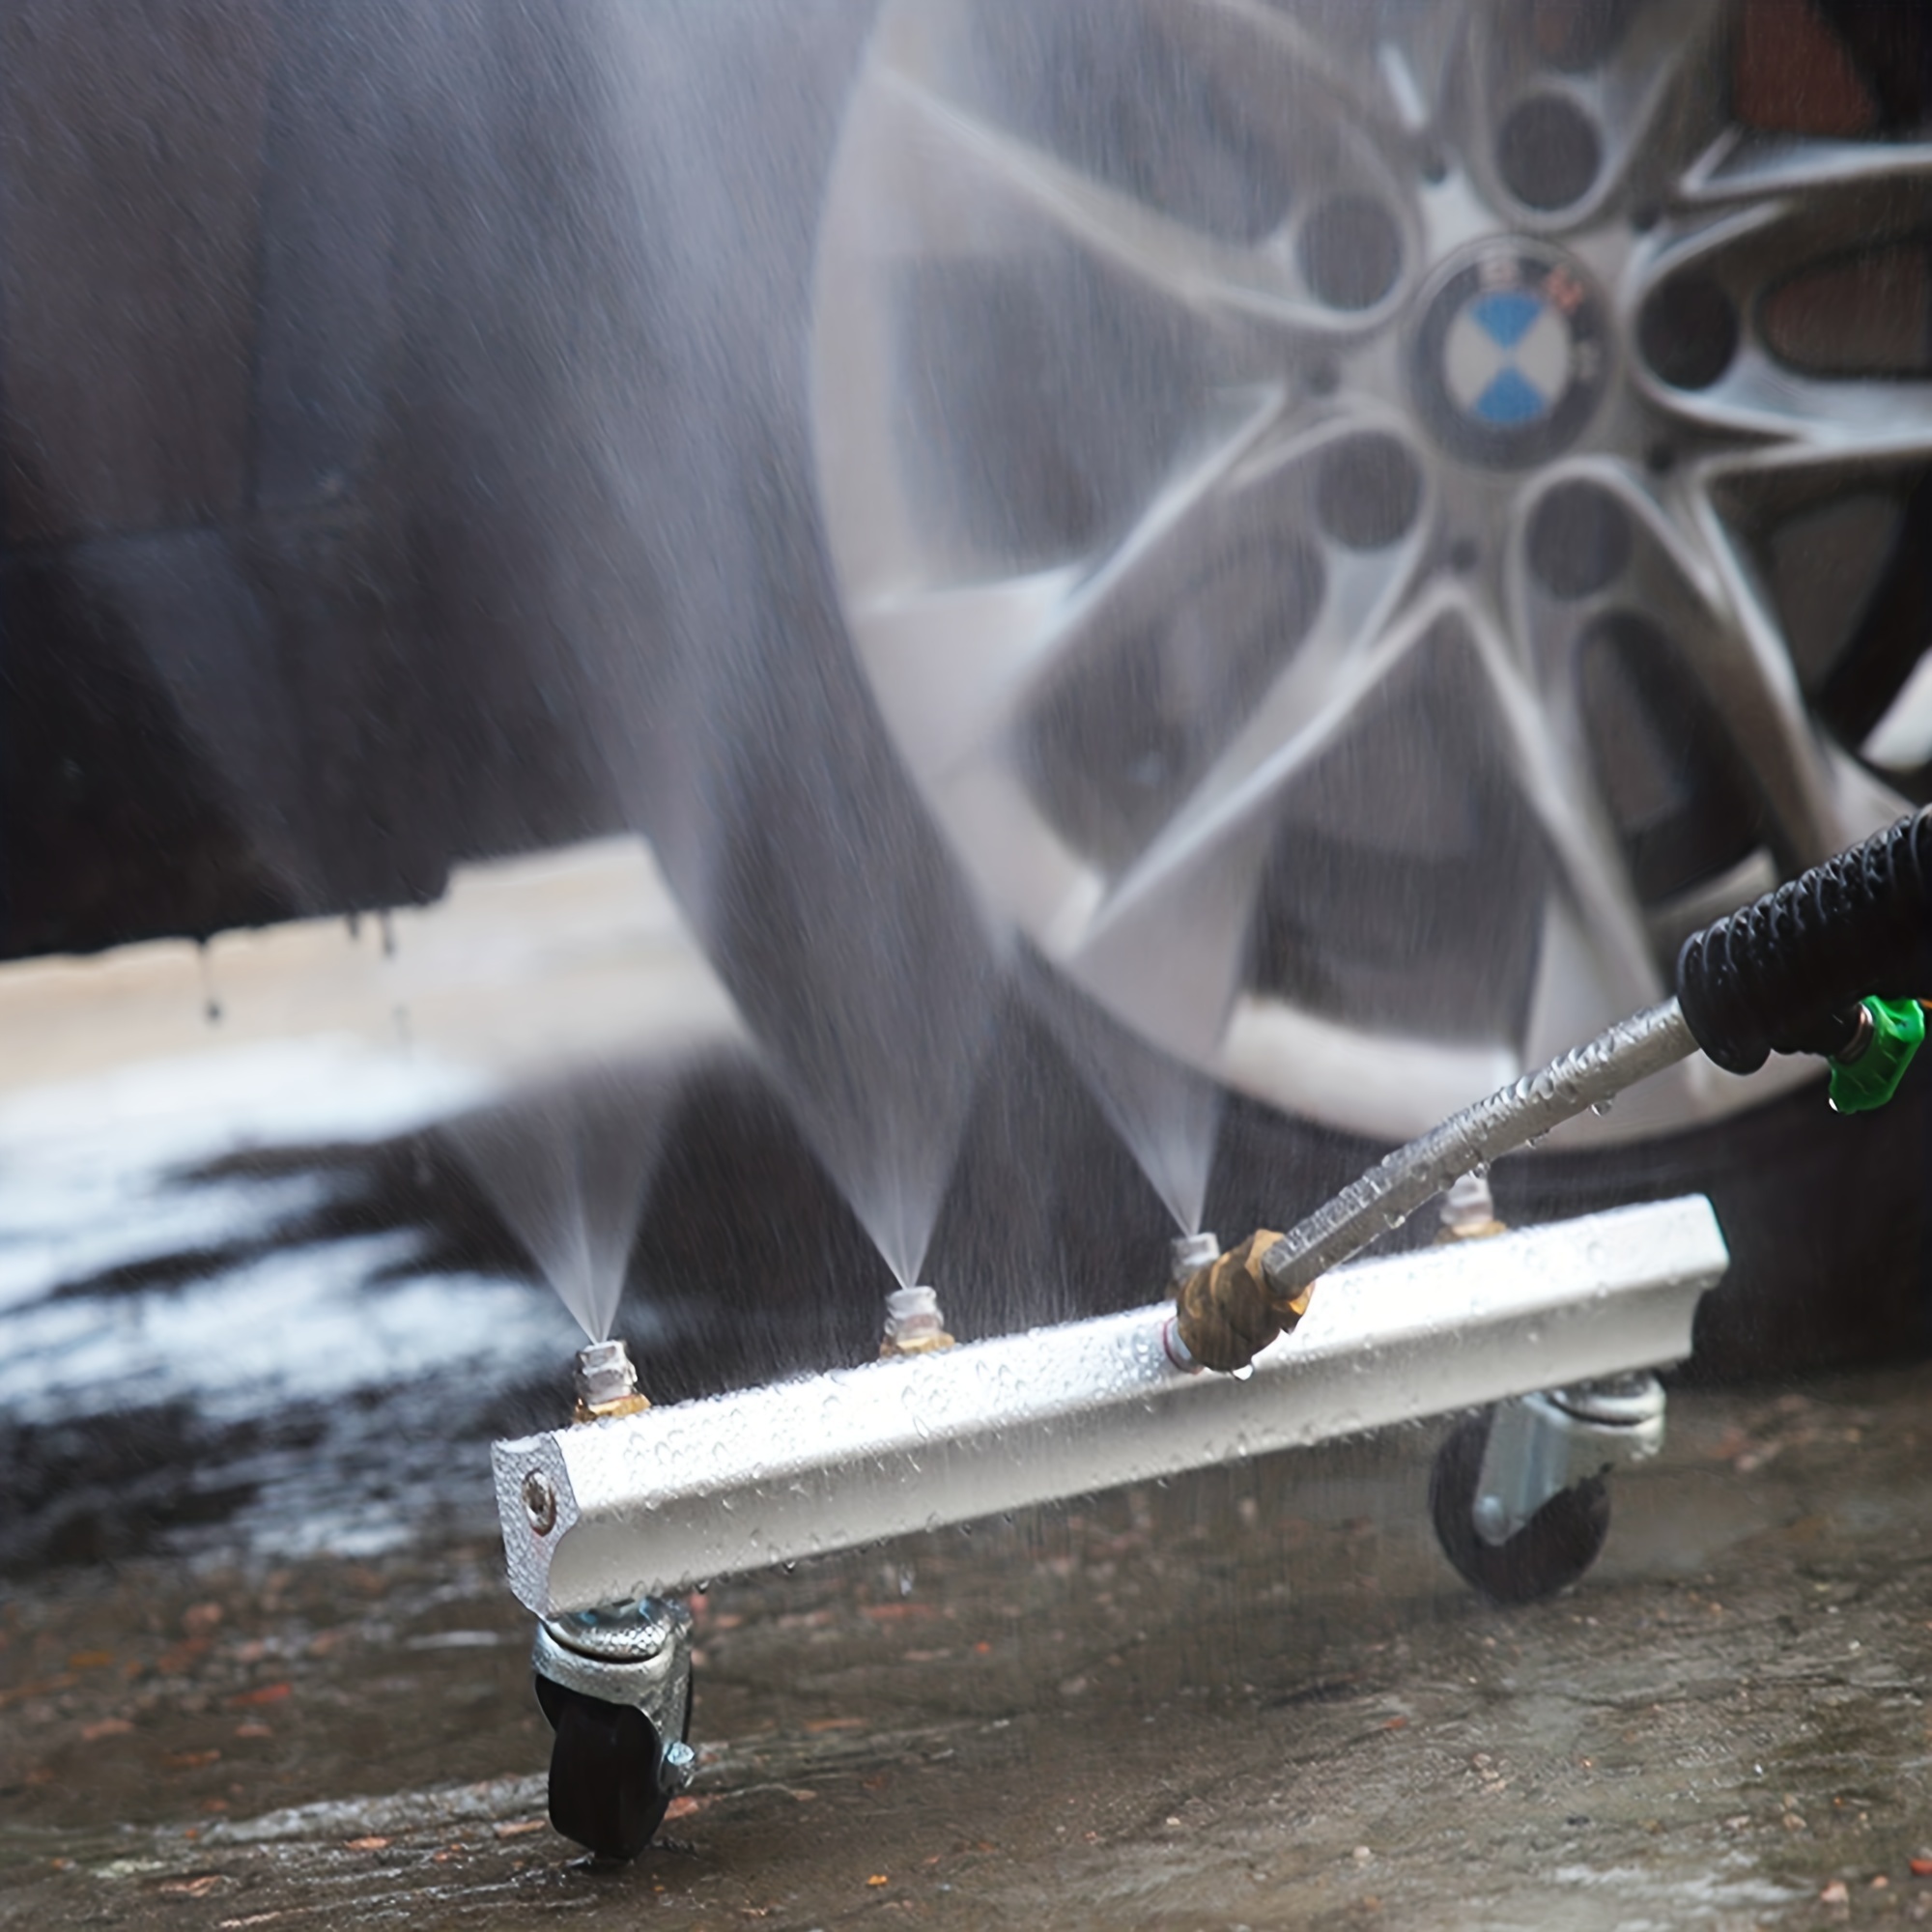  M MINGLE Pressure Washer Undercarriage Cleaner, Under Car Wash,  with 45 Degree Angled Wand : Patio, Lawn & Garden